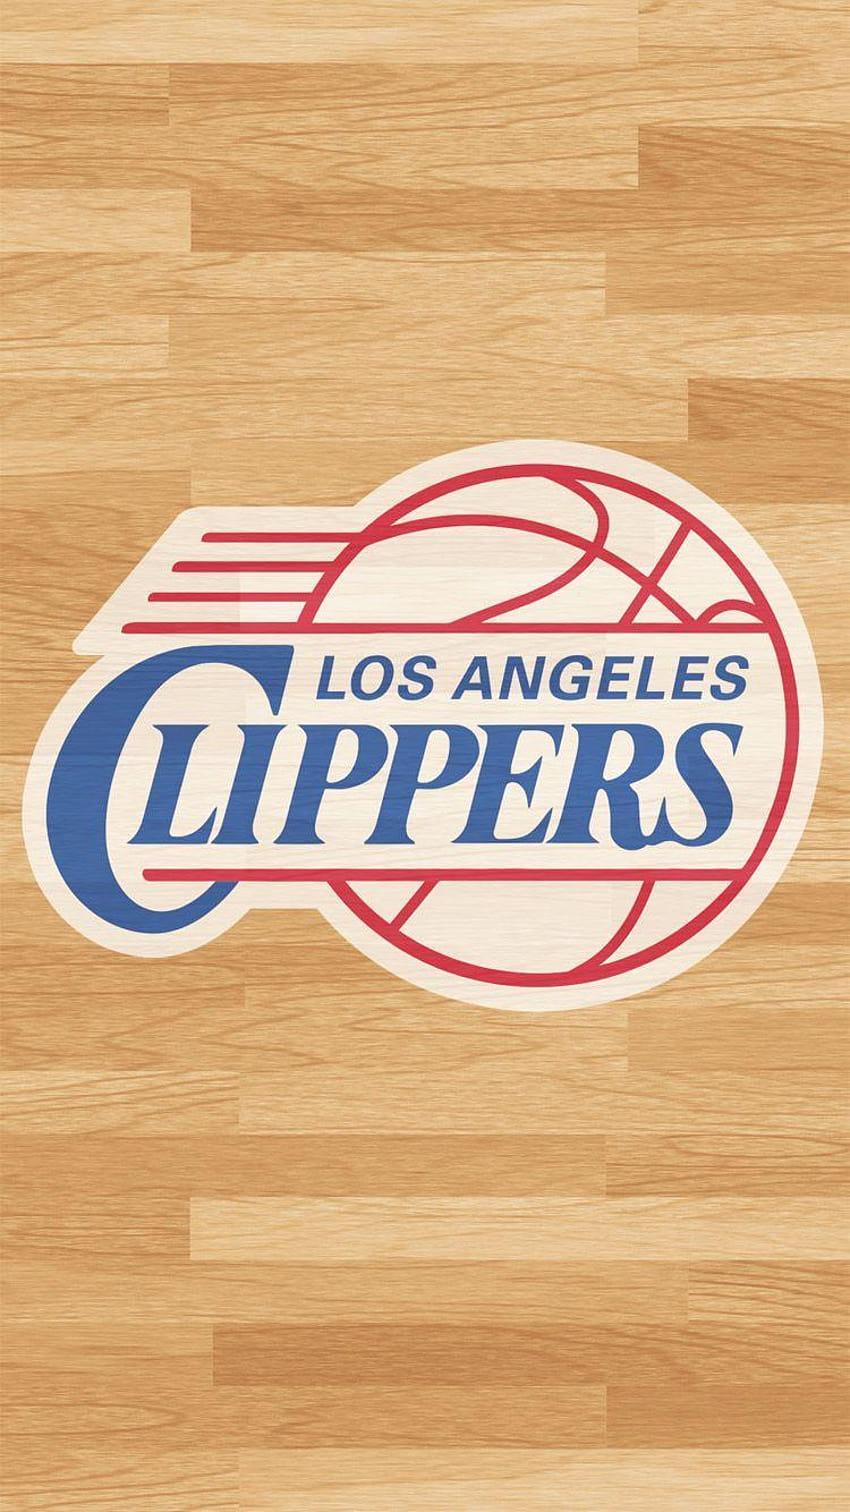 Los Angeles Clippers iPhone 6/6 plus and backgrounds HD phone wallpaper